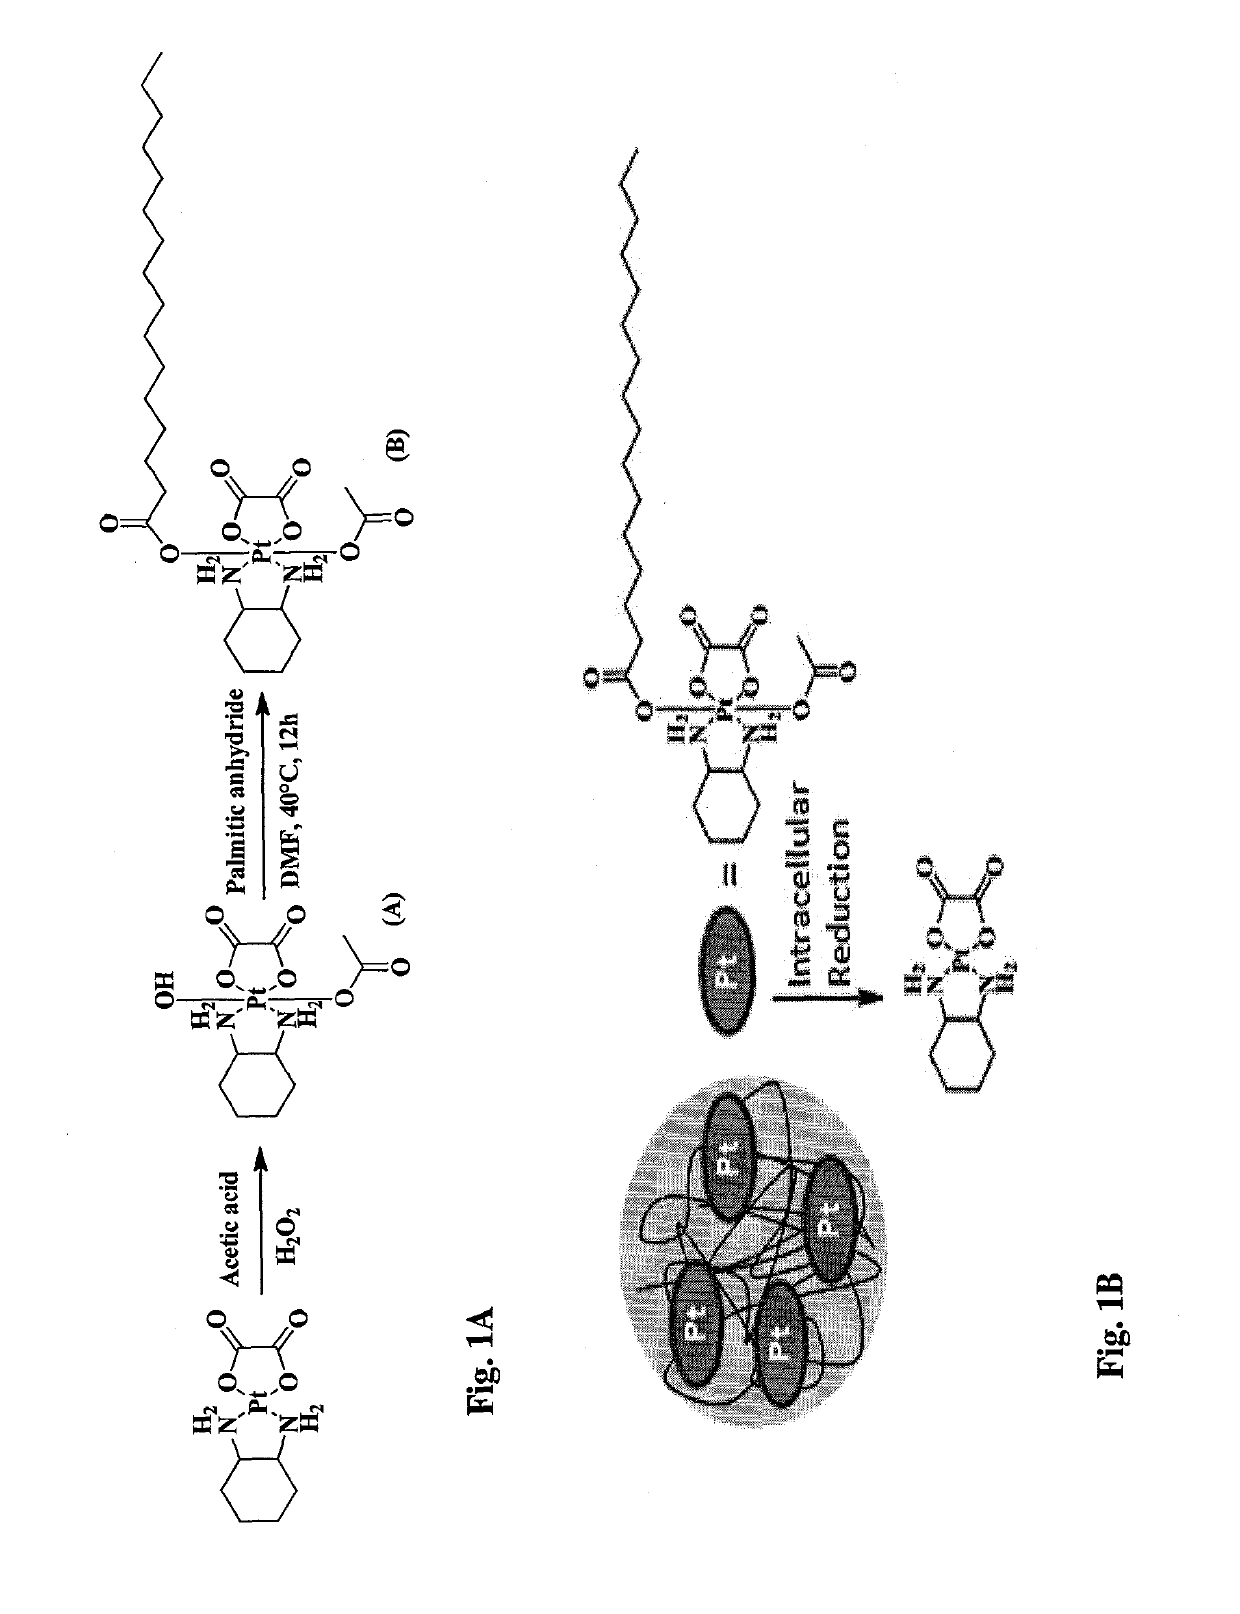 Pt (IV) derivatives and nanocarriers comprising them